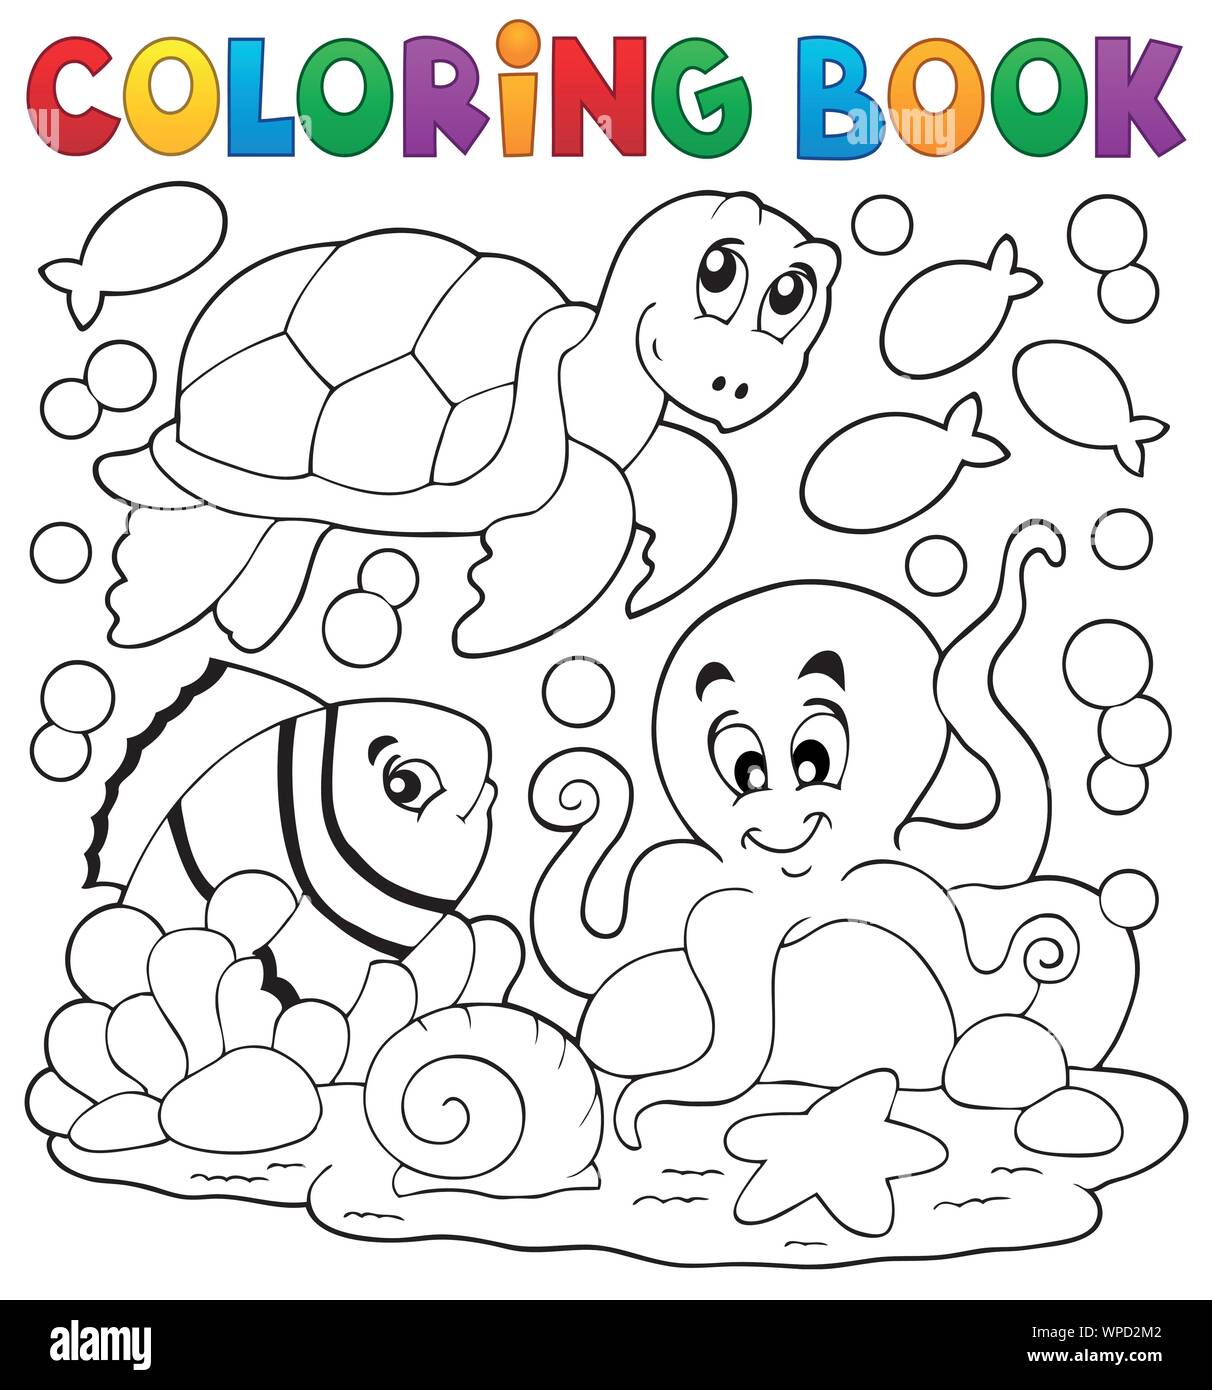 Coloring book with sea animals 5 Stock Vector